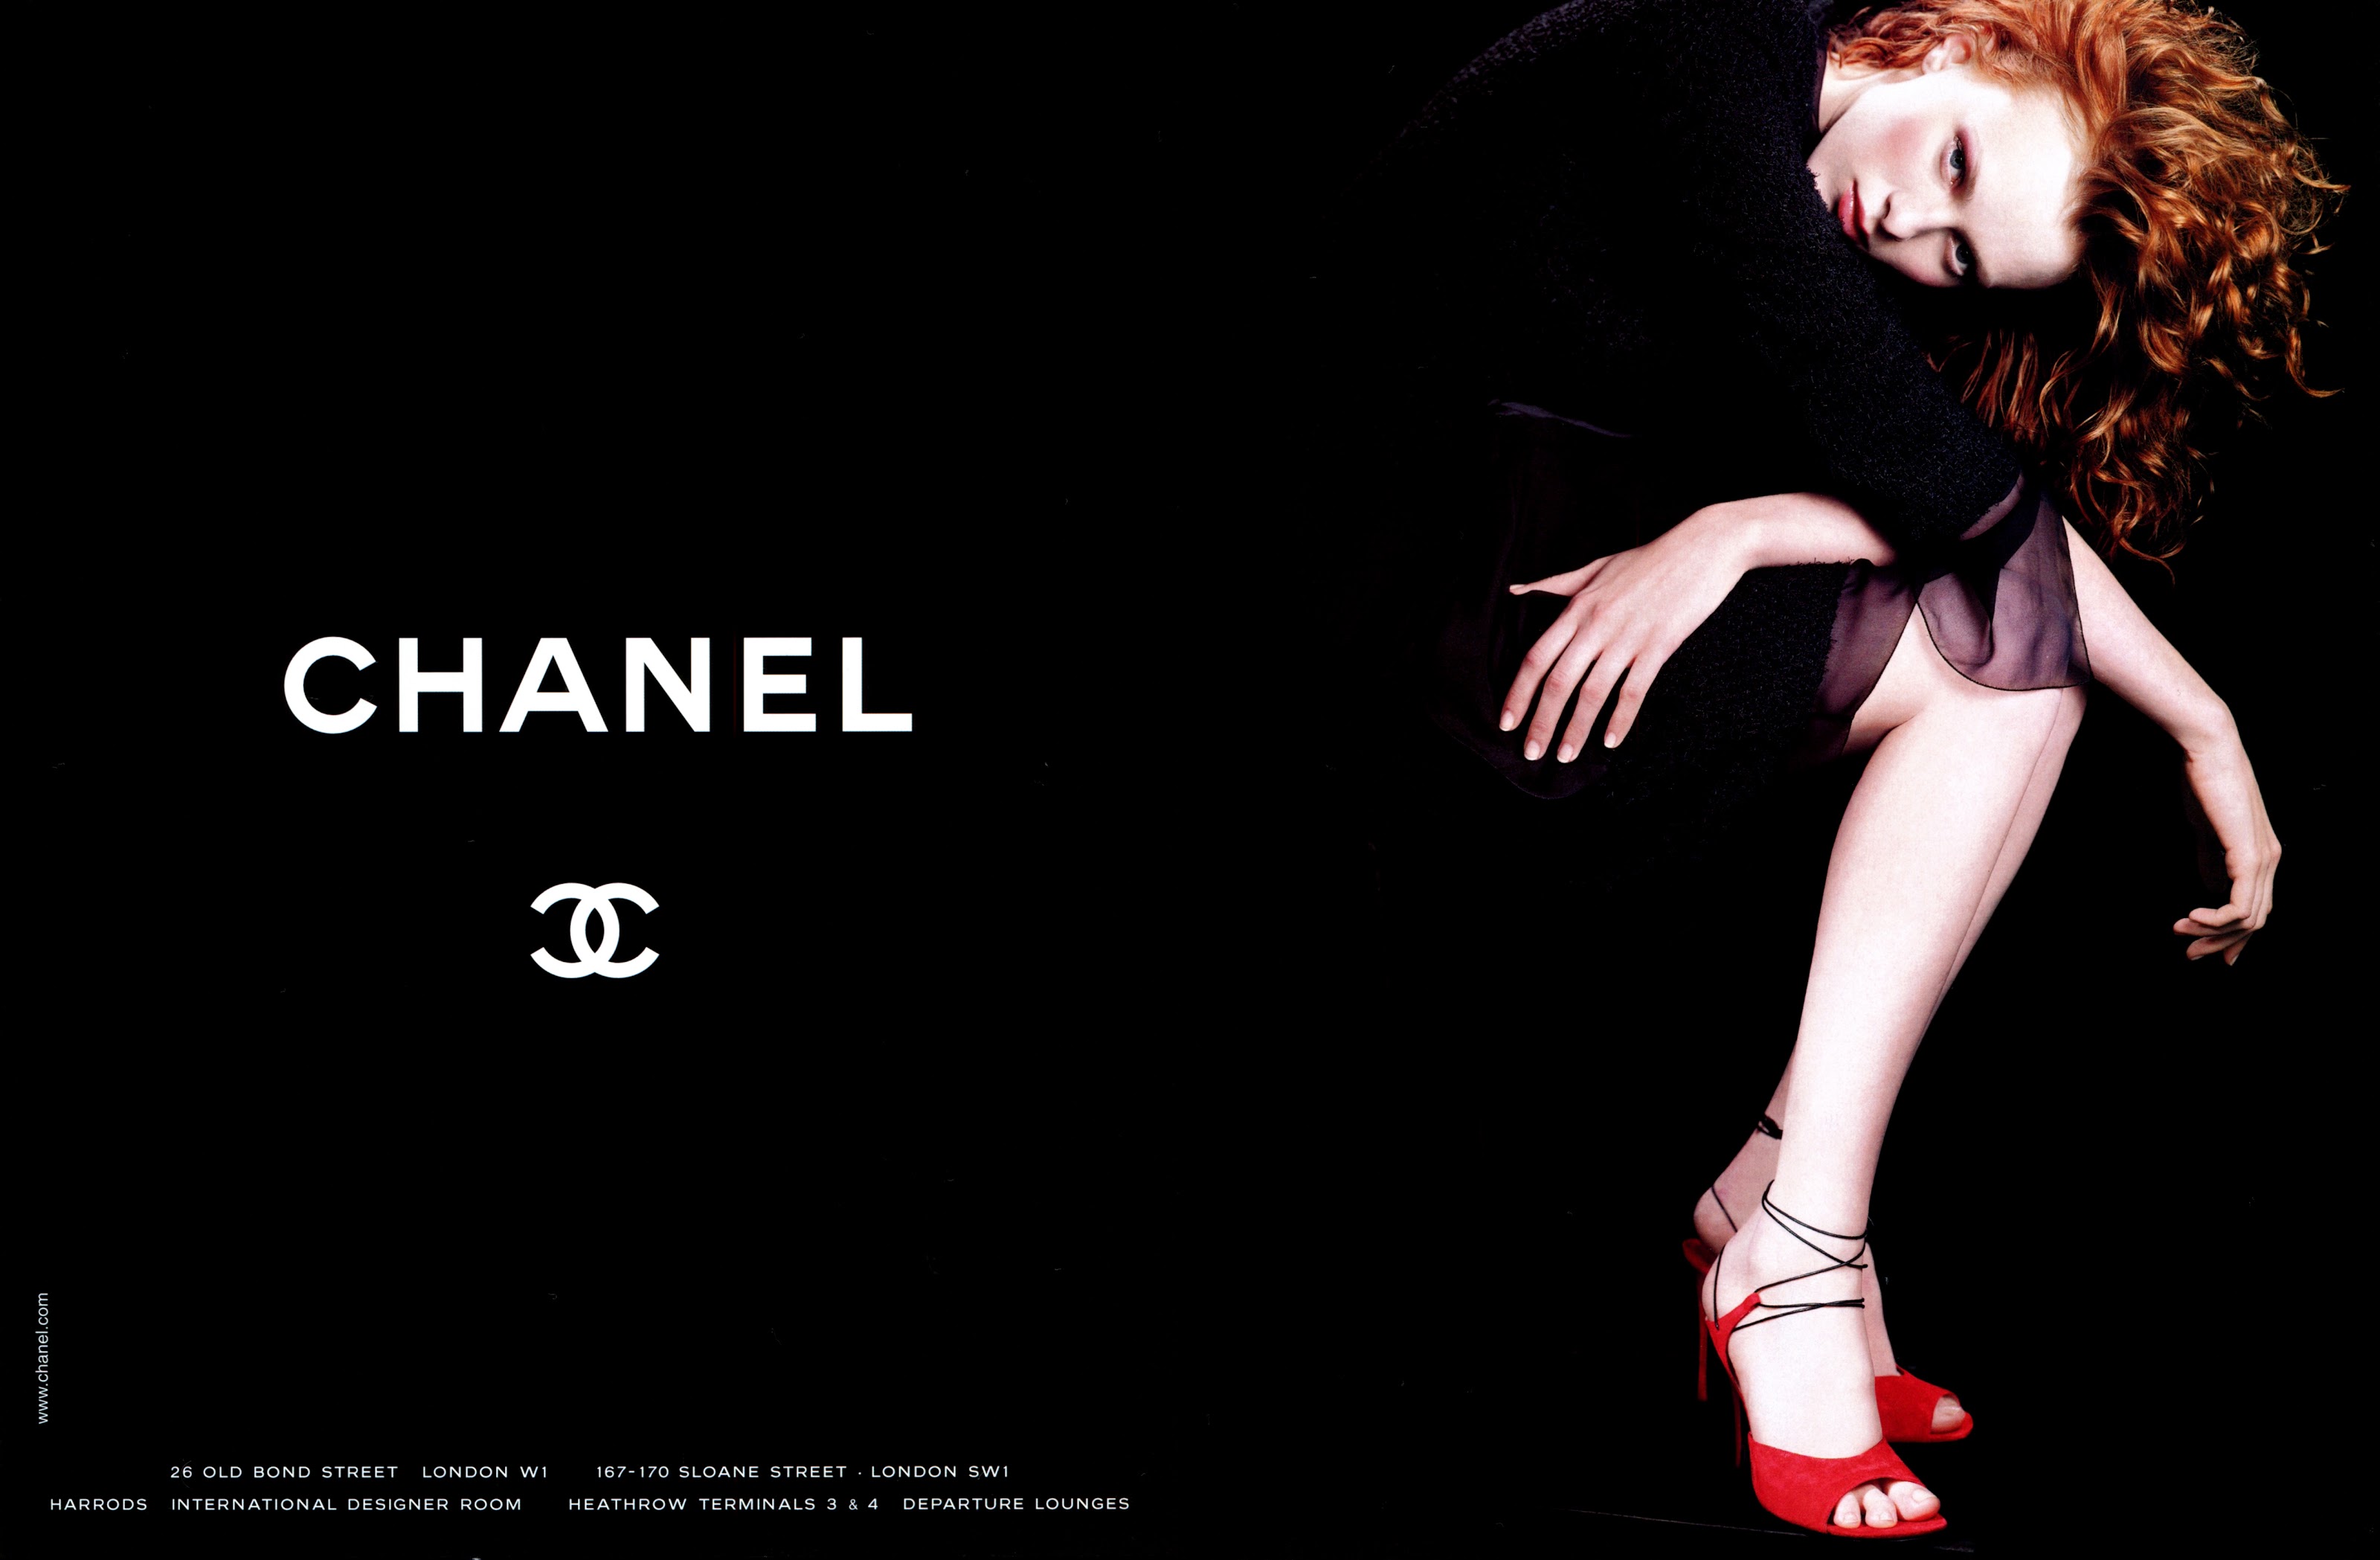 Best Chanel Fashion Show Moments of All Time - Karl Lagerfeld